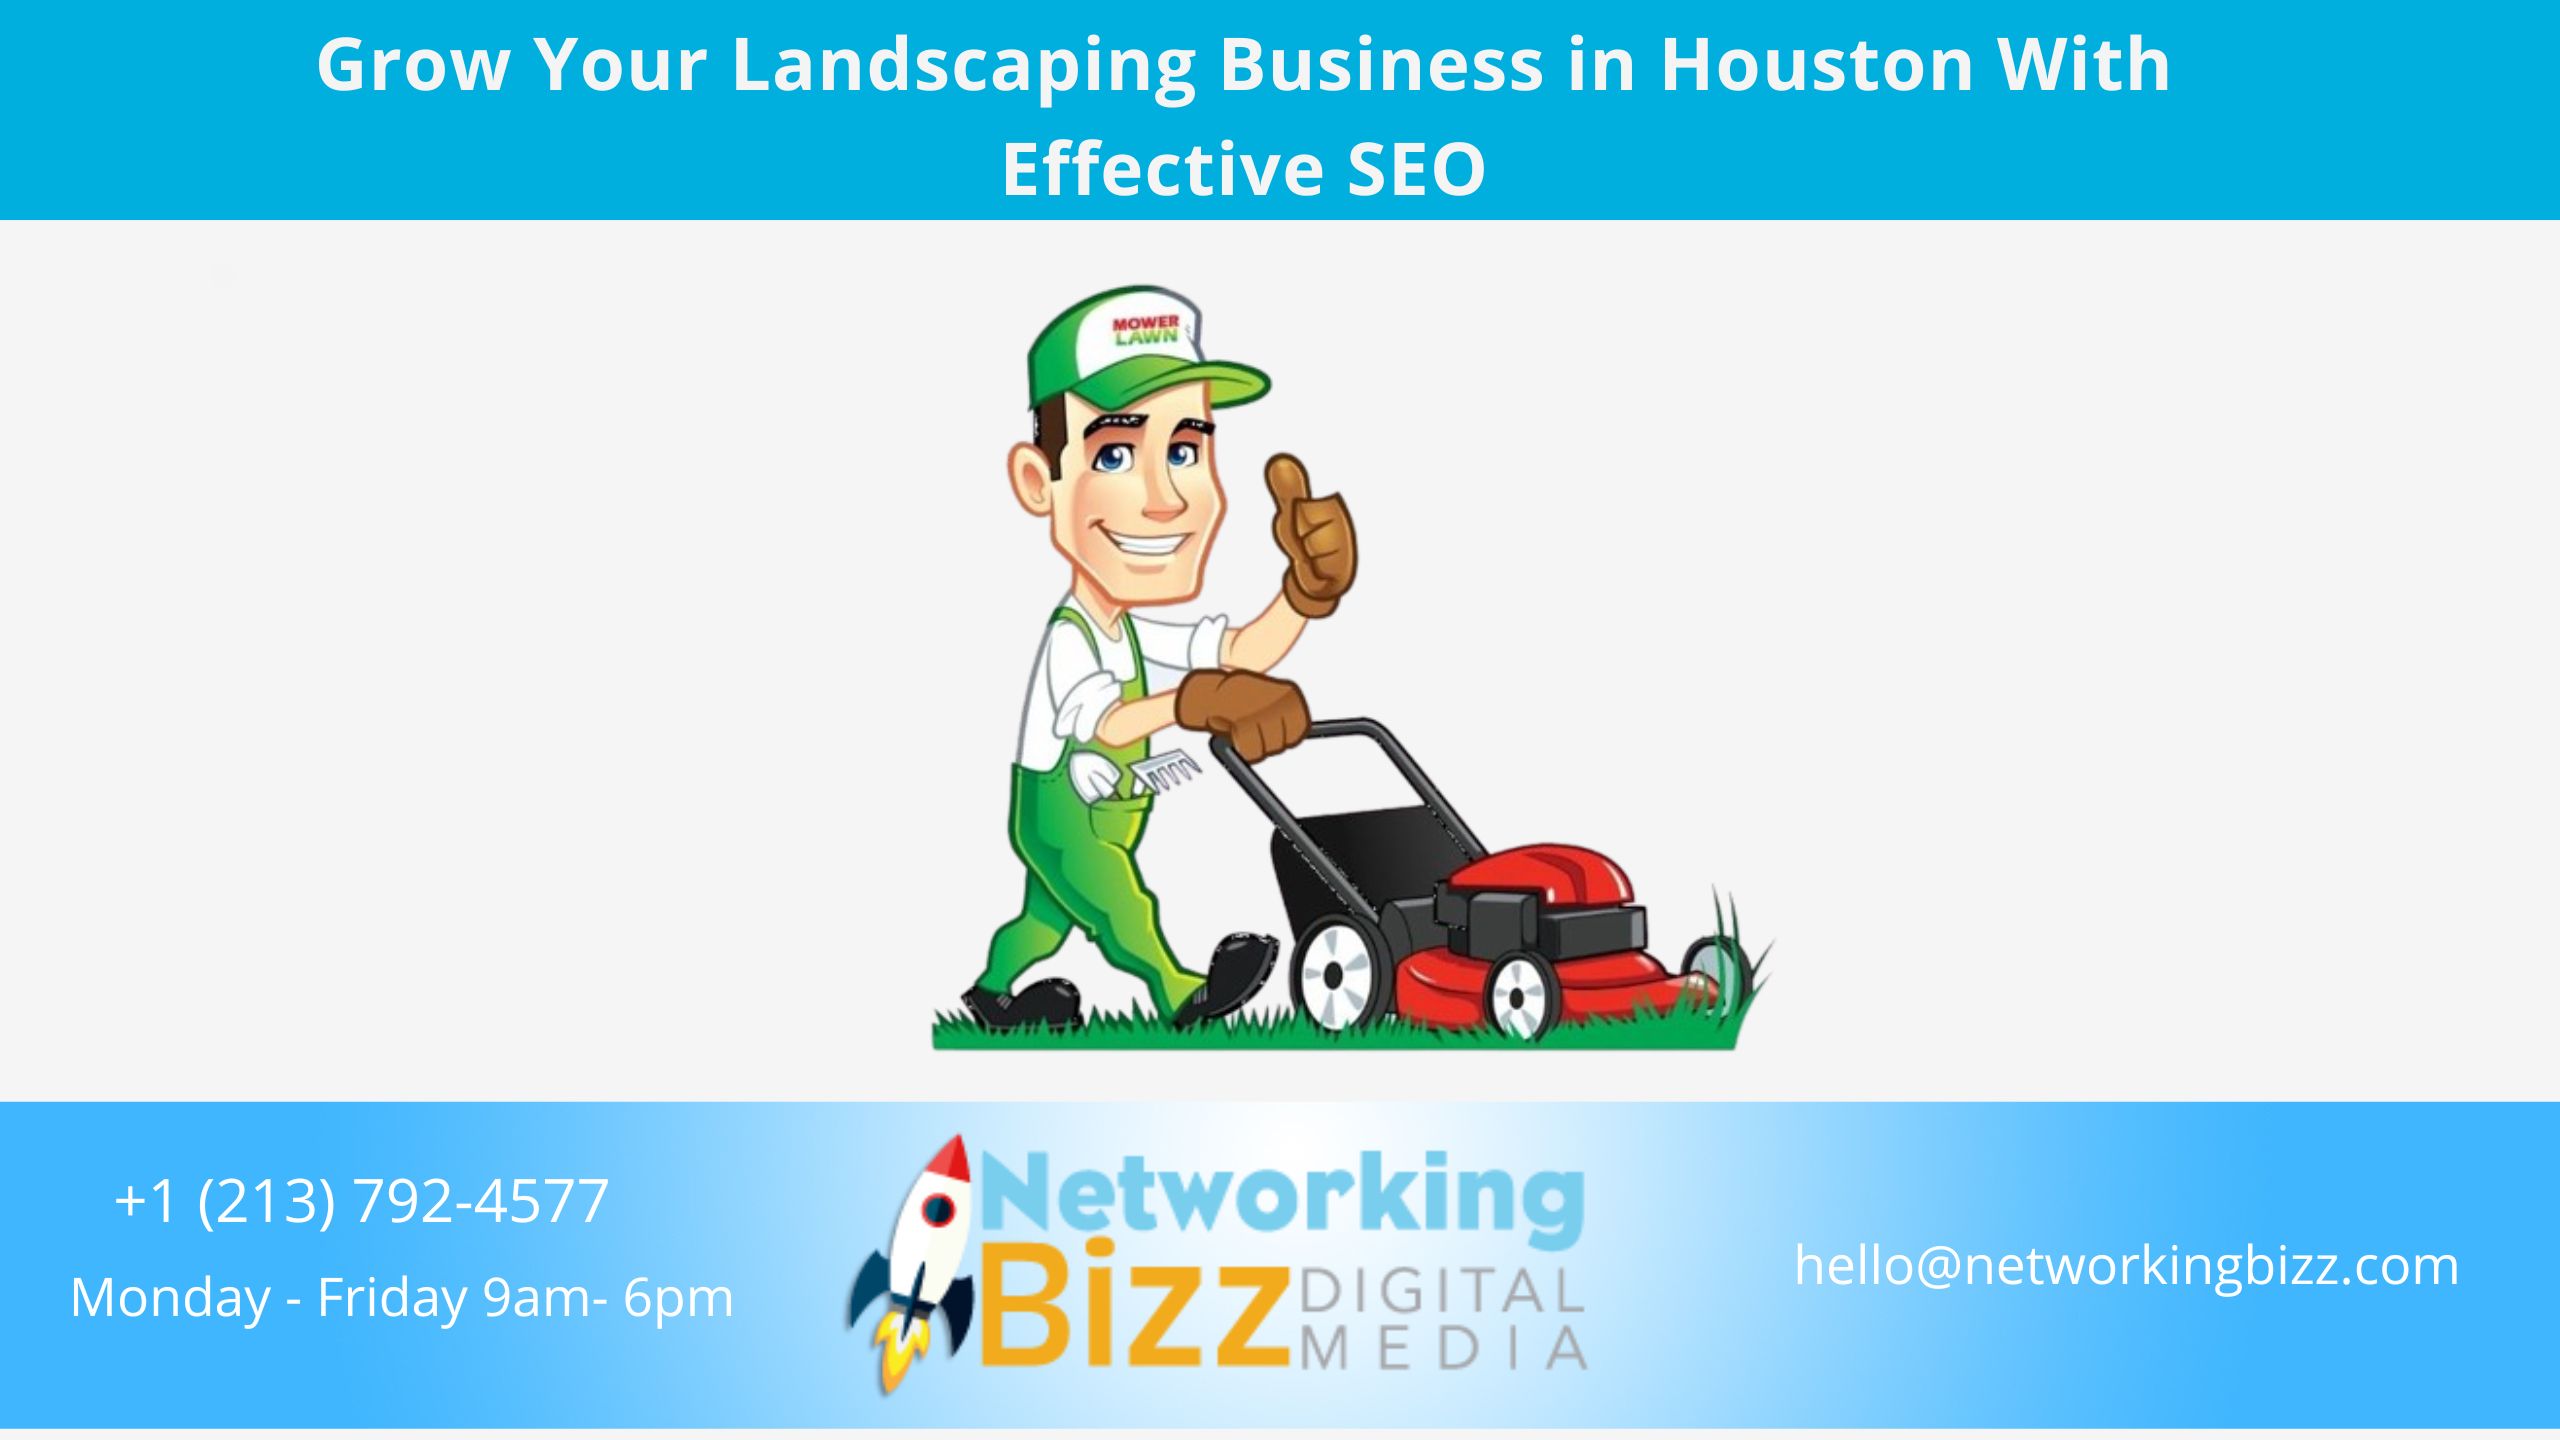 Grow Your Landscaping Business in Houston With Effective SEO